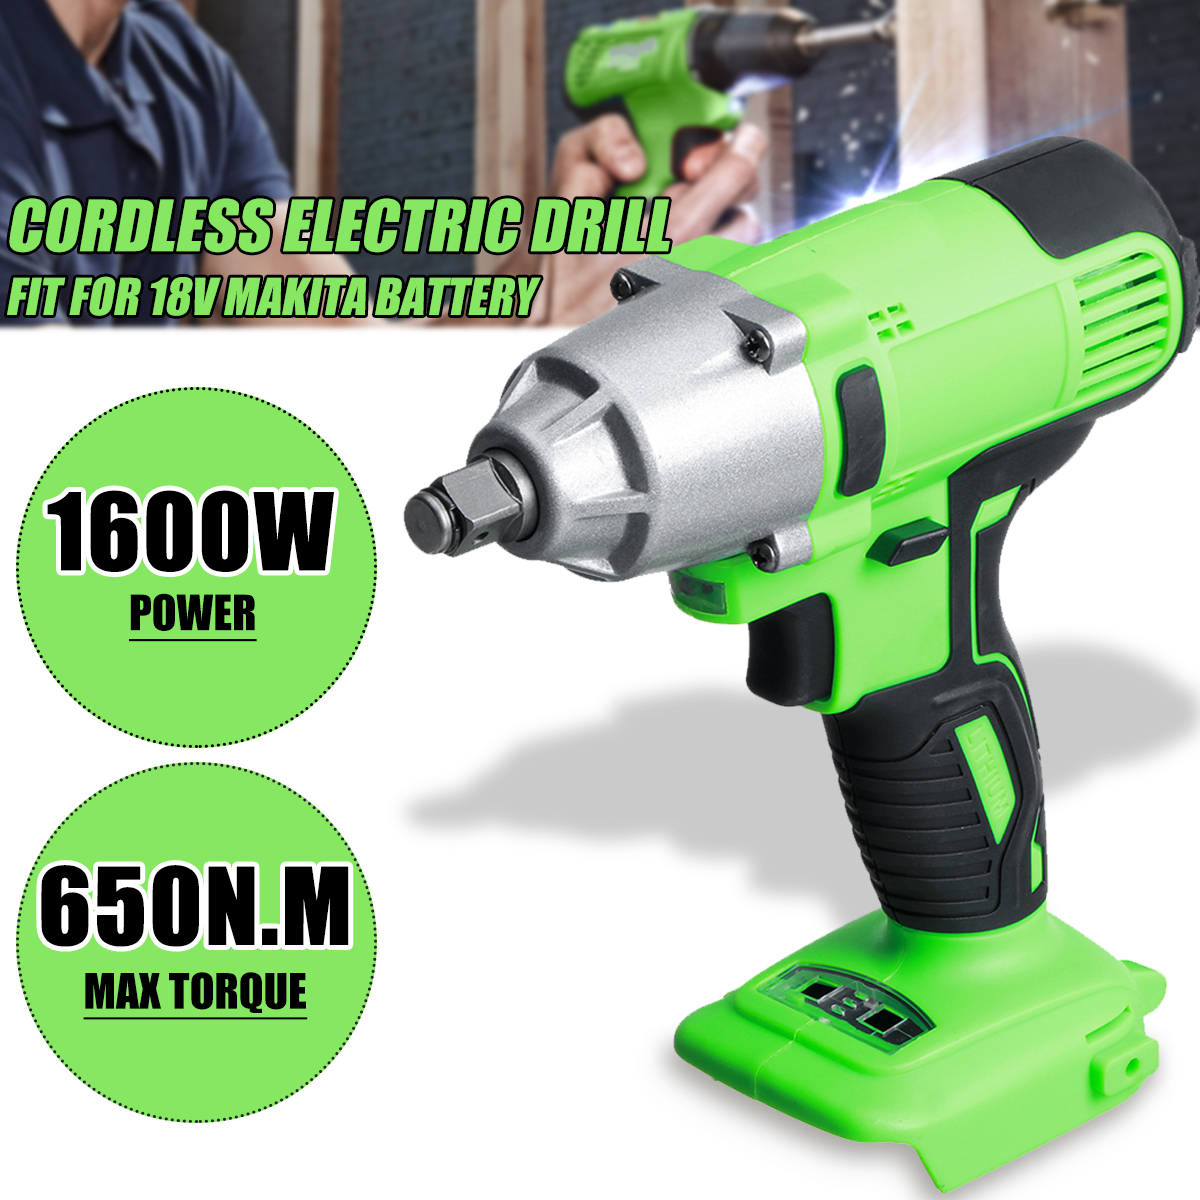 650NM-1600W-Brushless-Cordless-Electric-Drill-Screwdriver-For-Makita-18V-Battety-1783492-1